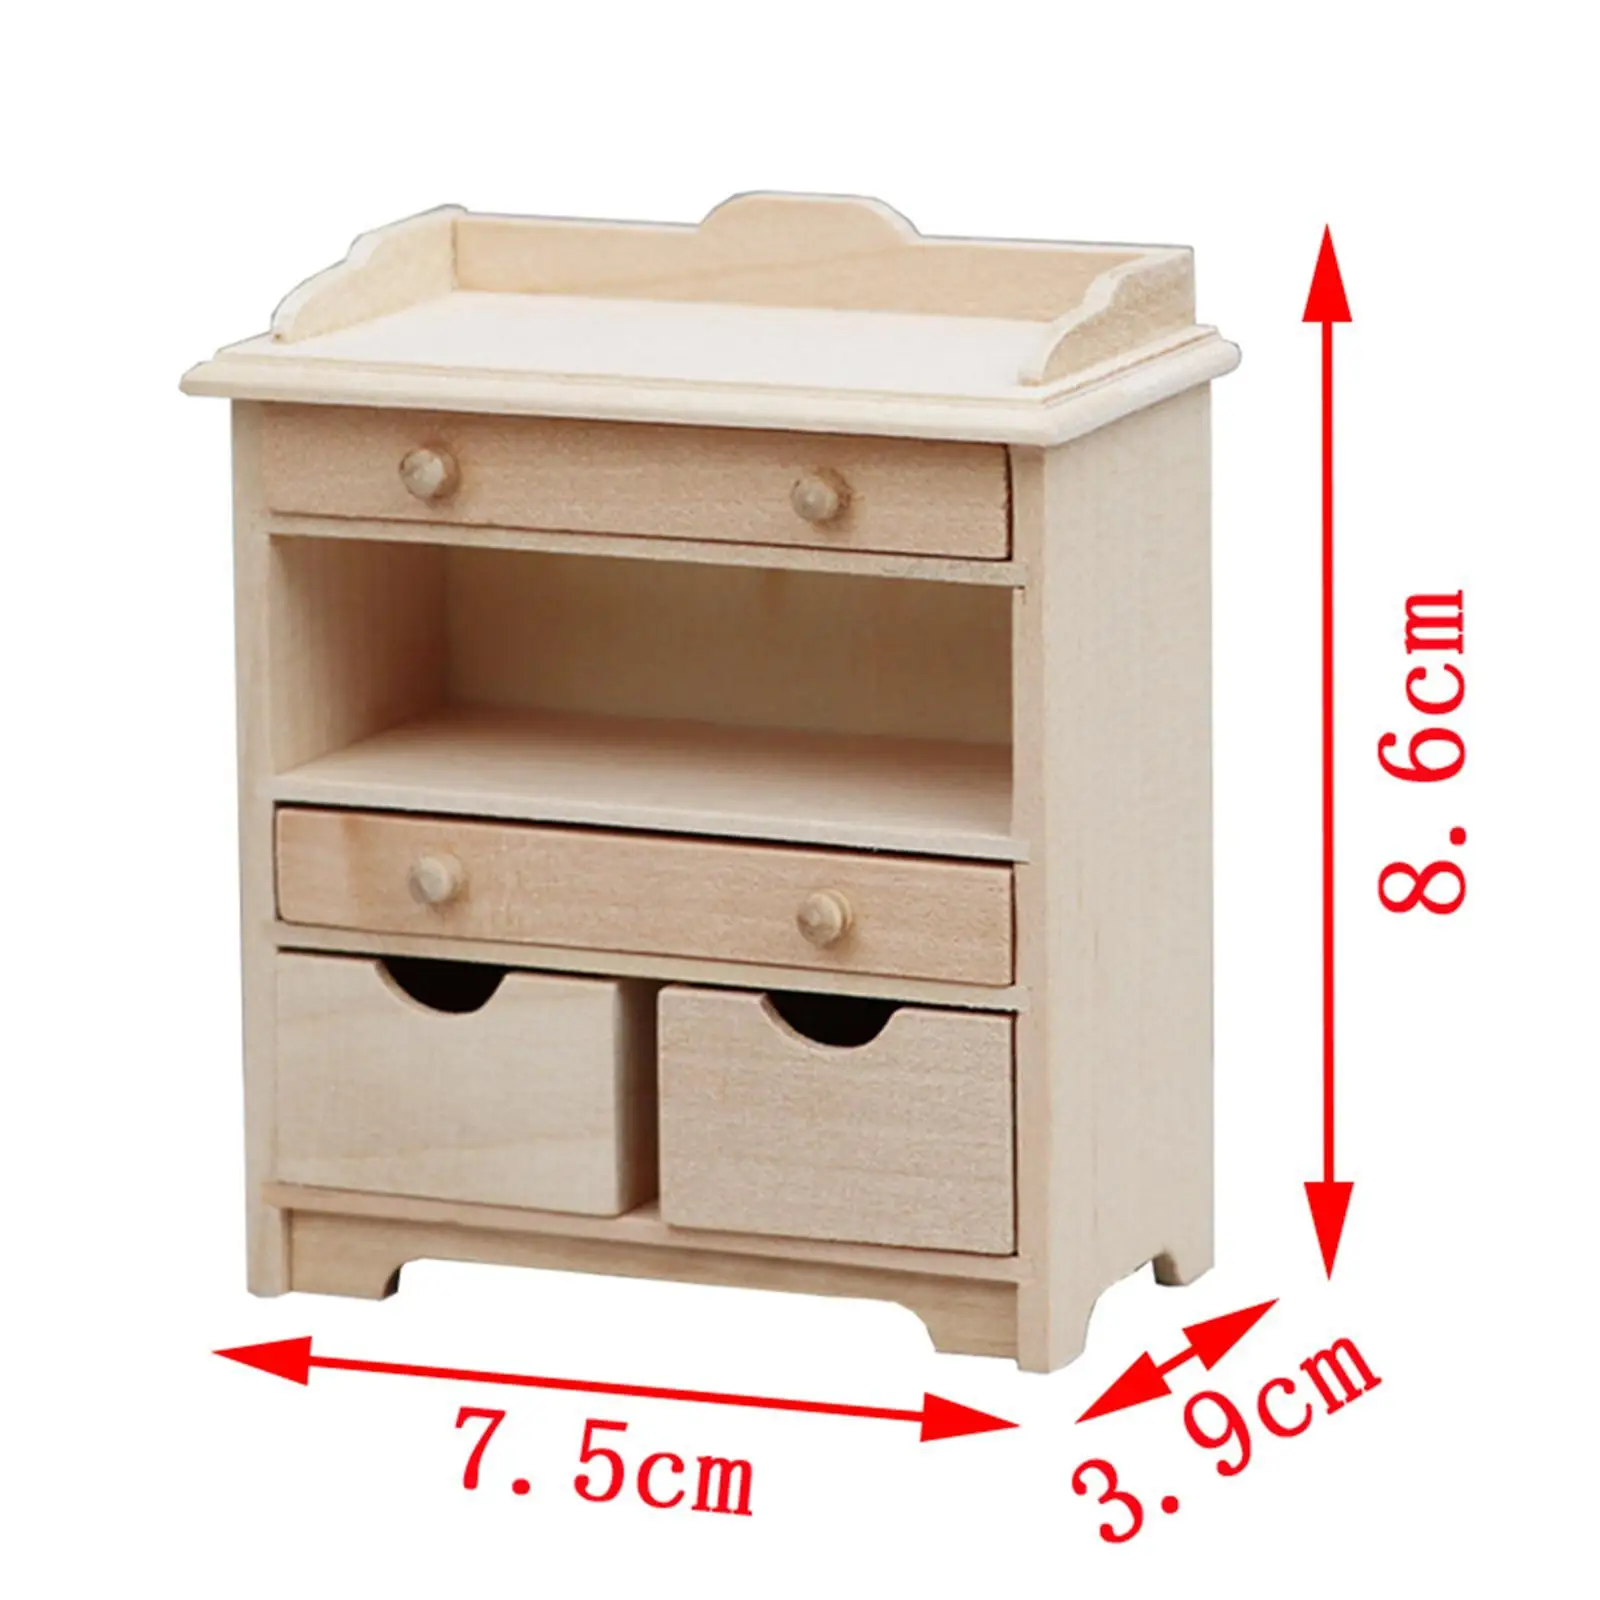 1/12 Dollhouse NightStand Unpainted Model Bedside Tables for Dollhouse Decor